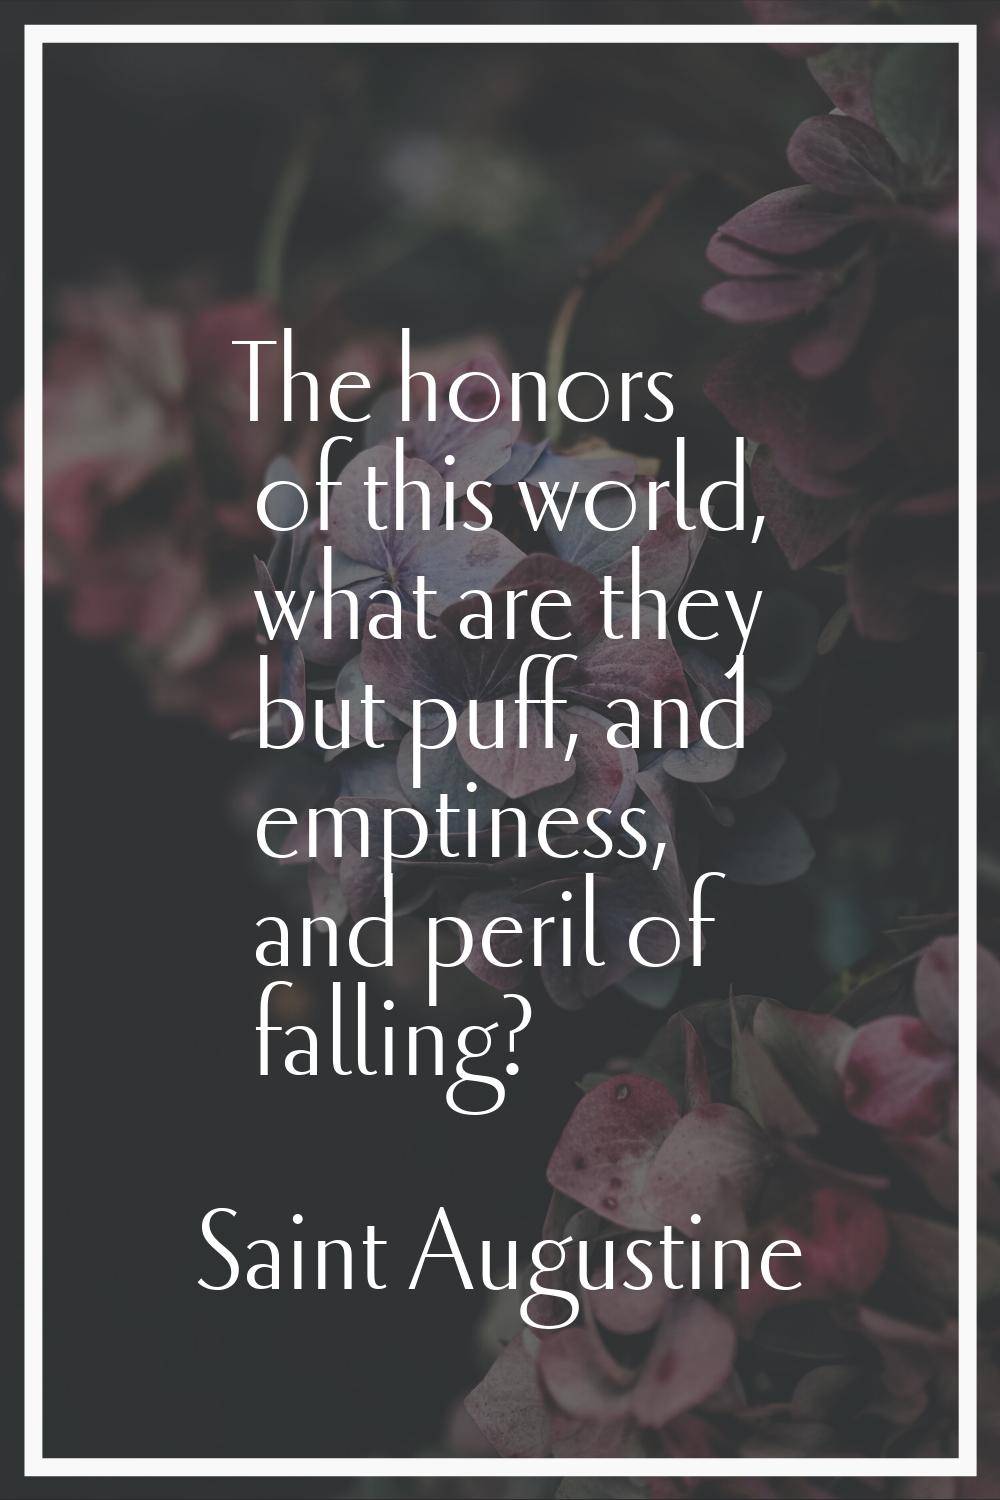 The honors of this world, what are they but puff, and emptiness, and peril of falling?